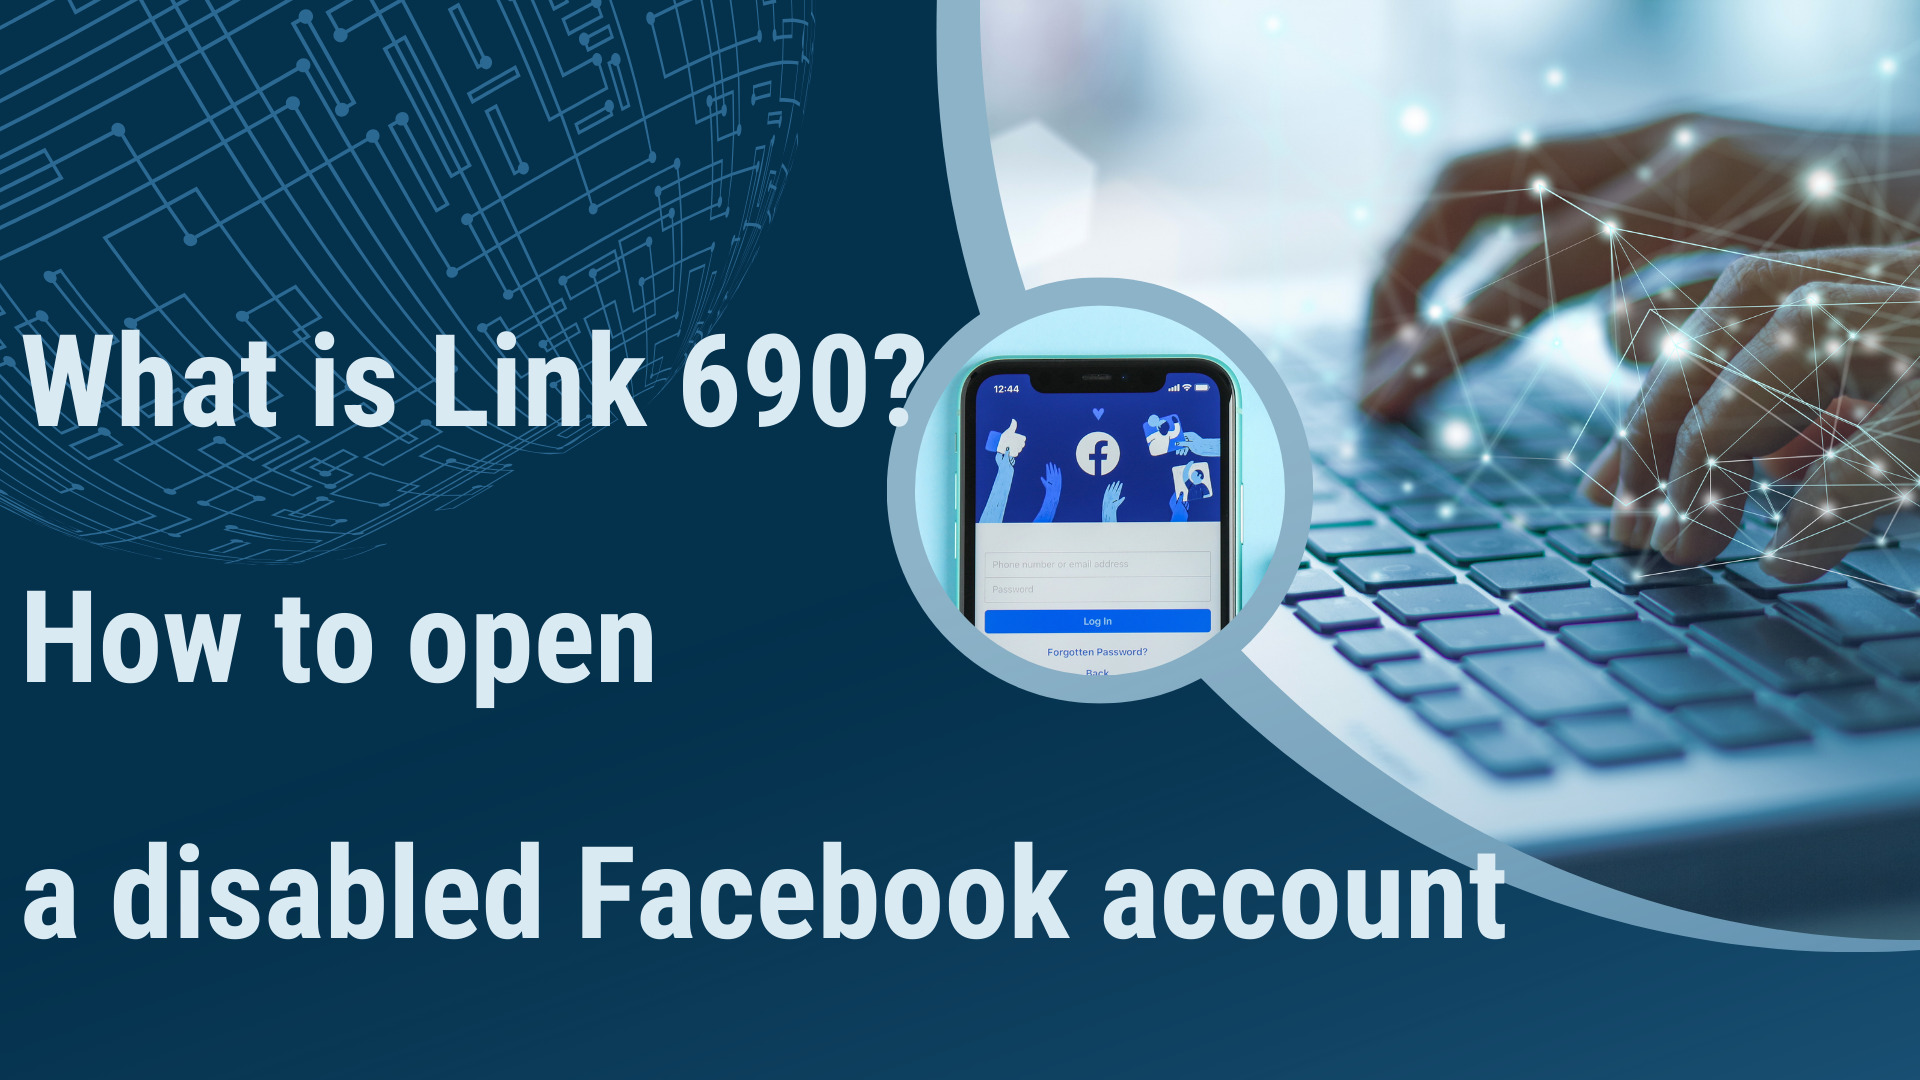 What is Link 690? How to open a disabled Facebook account